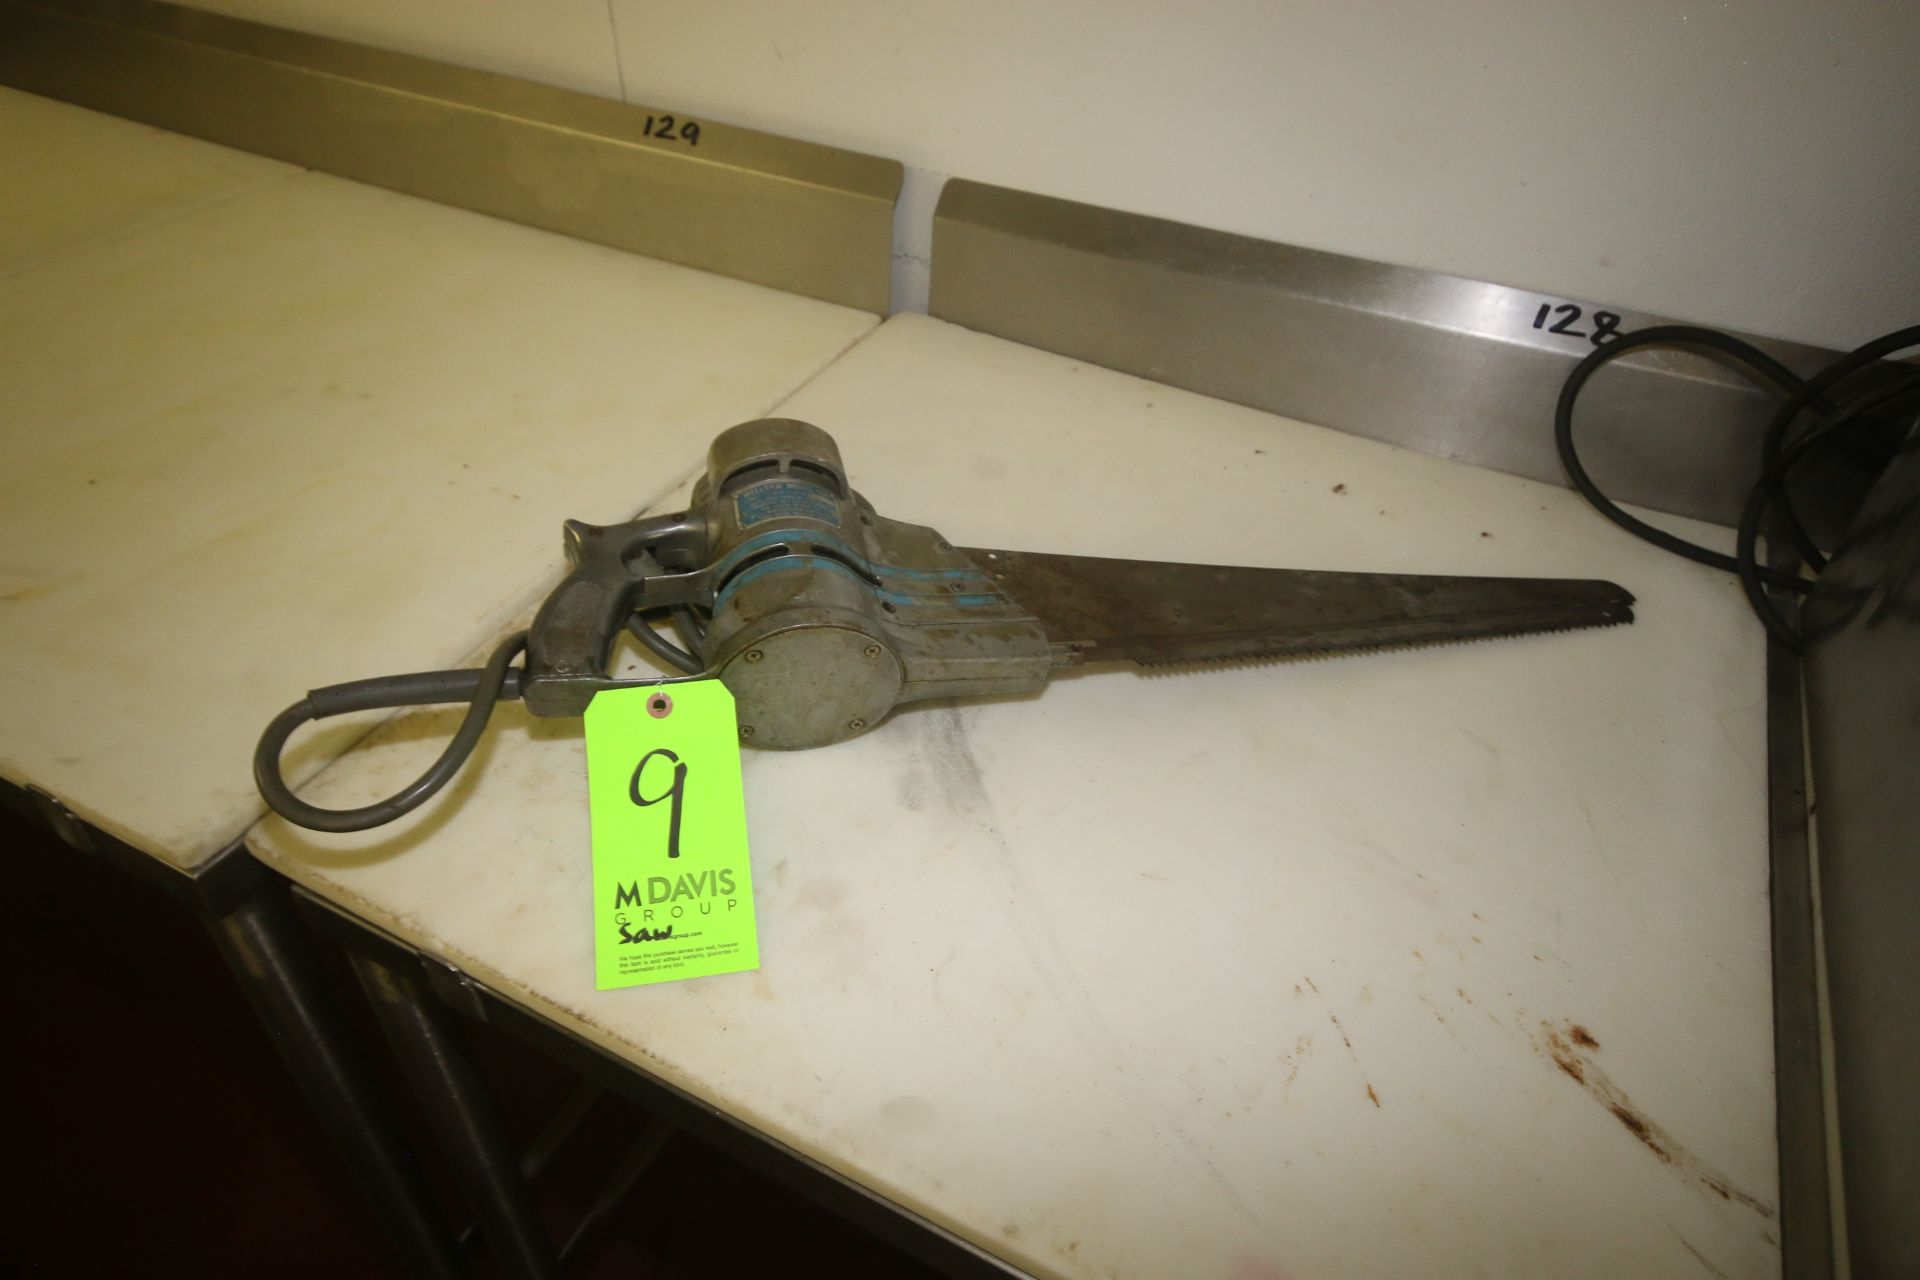 Wellsaw S/S Meat Saw, M/N 404, S/N M17143, 115 Volts, with Power Cord (Located on 1st Floor--